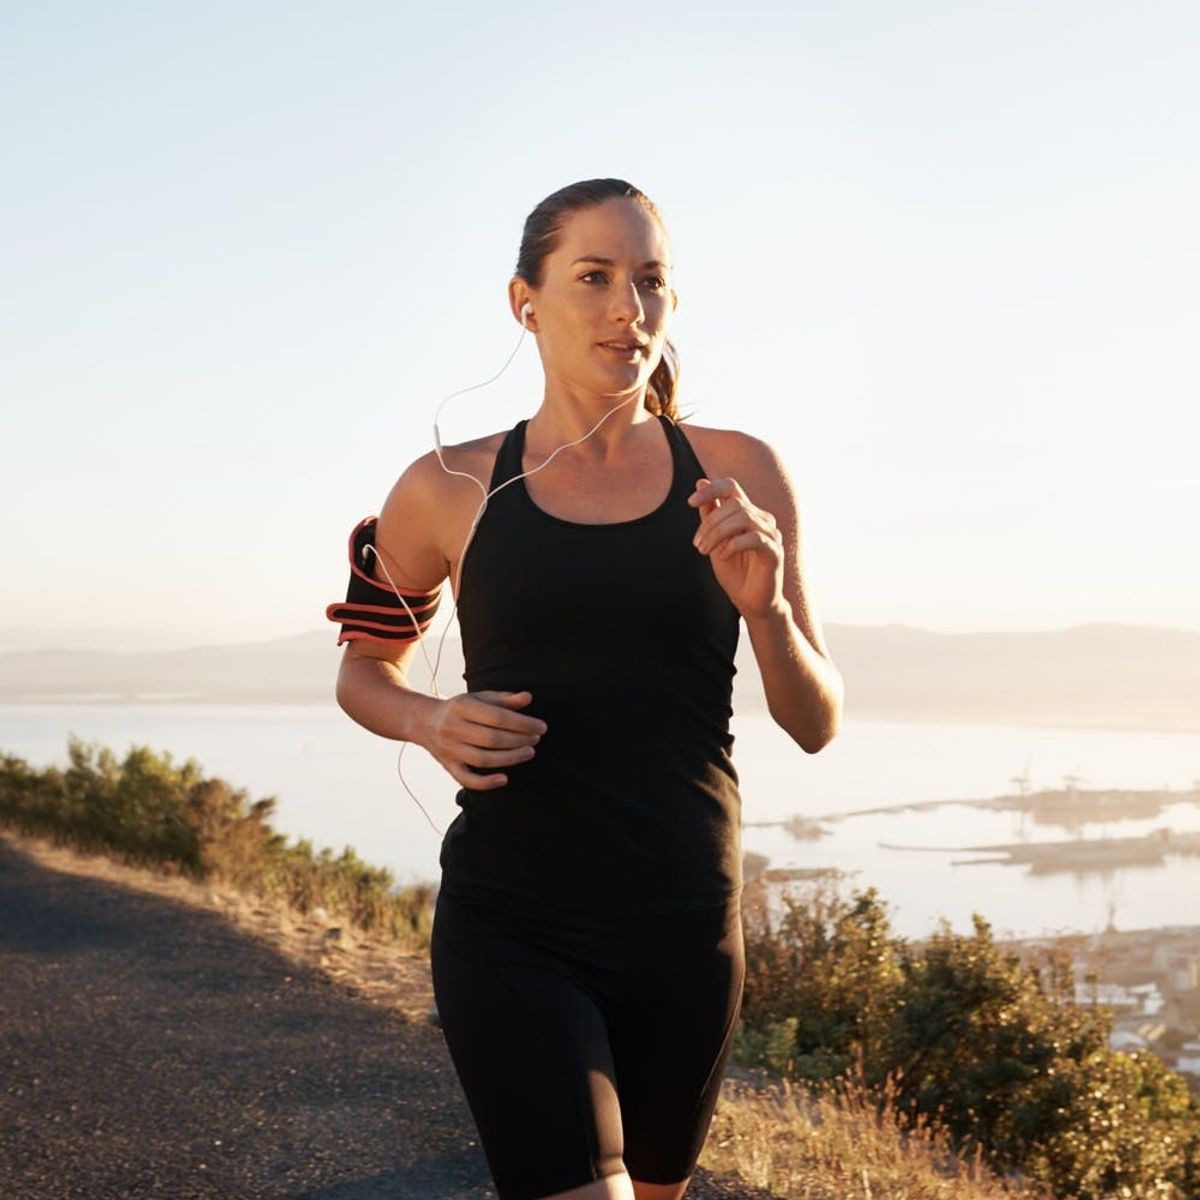 4 Major Benefits of Running Beyond Physical Health